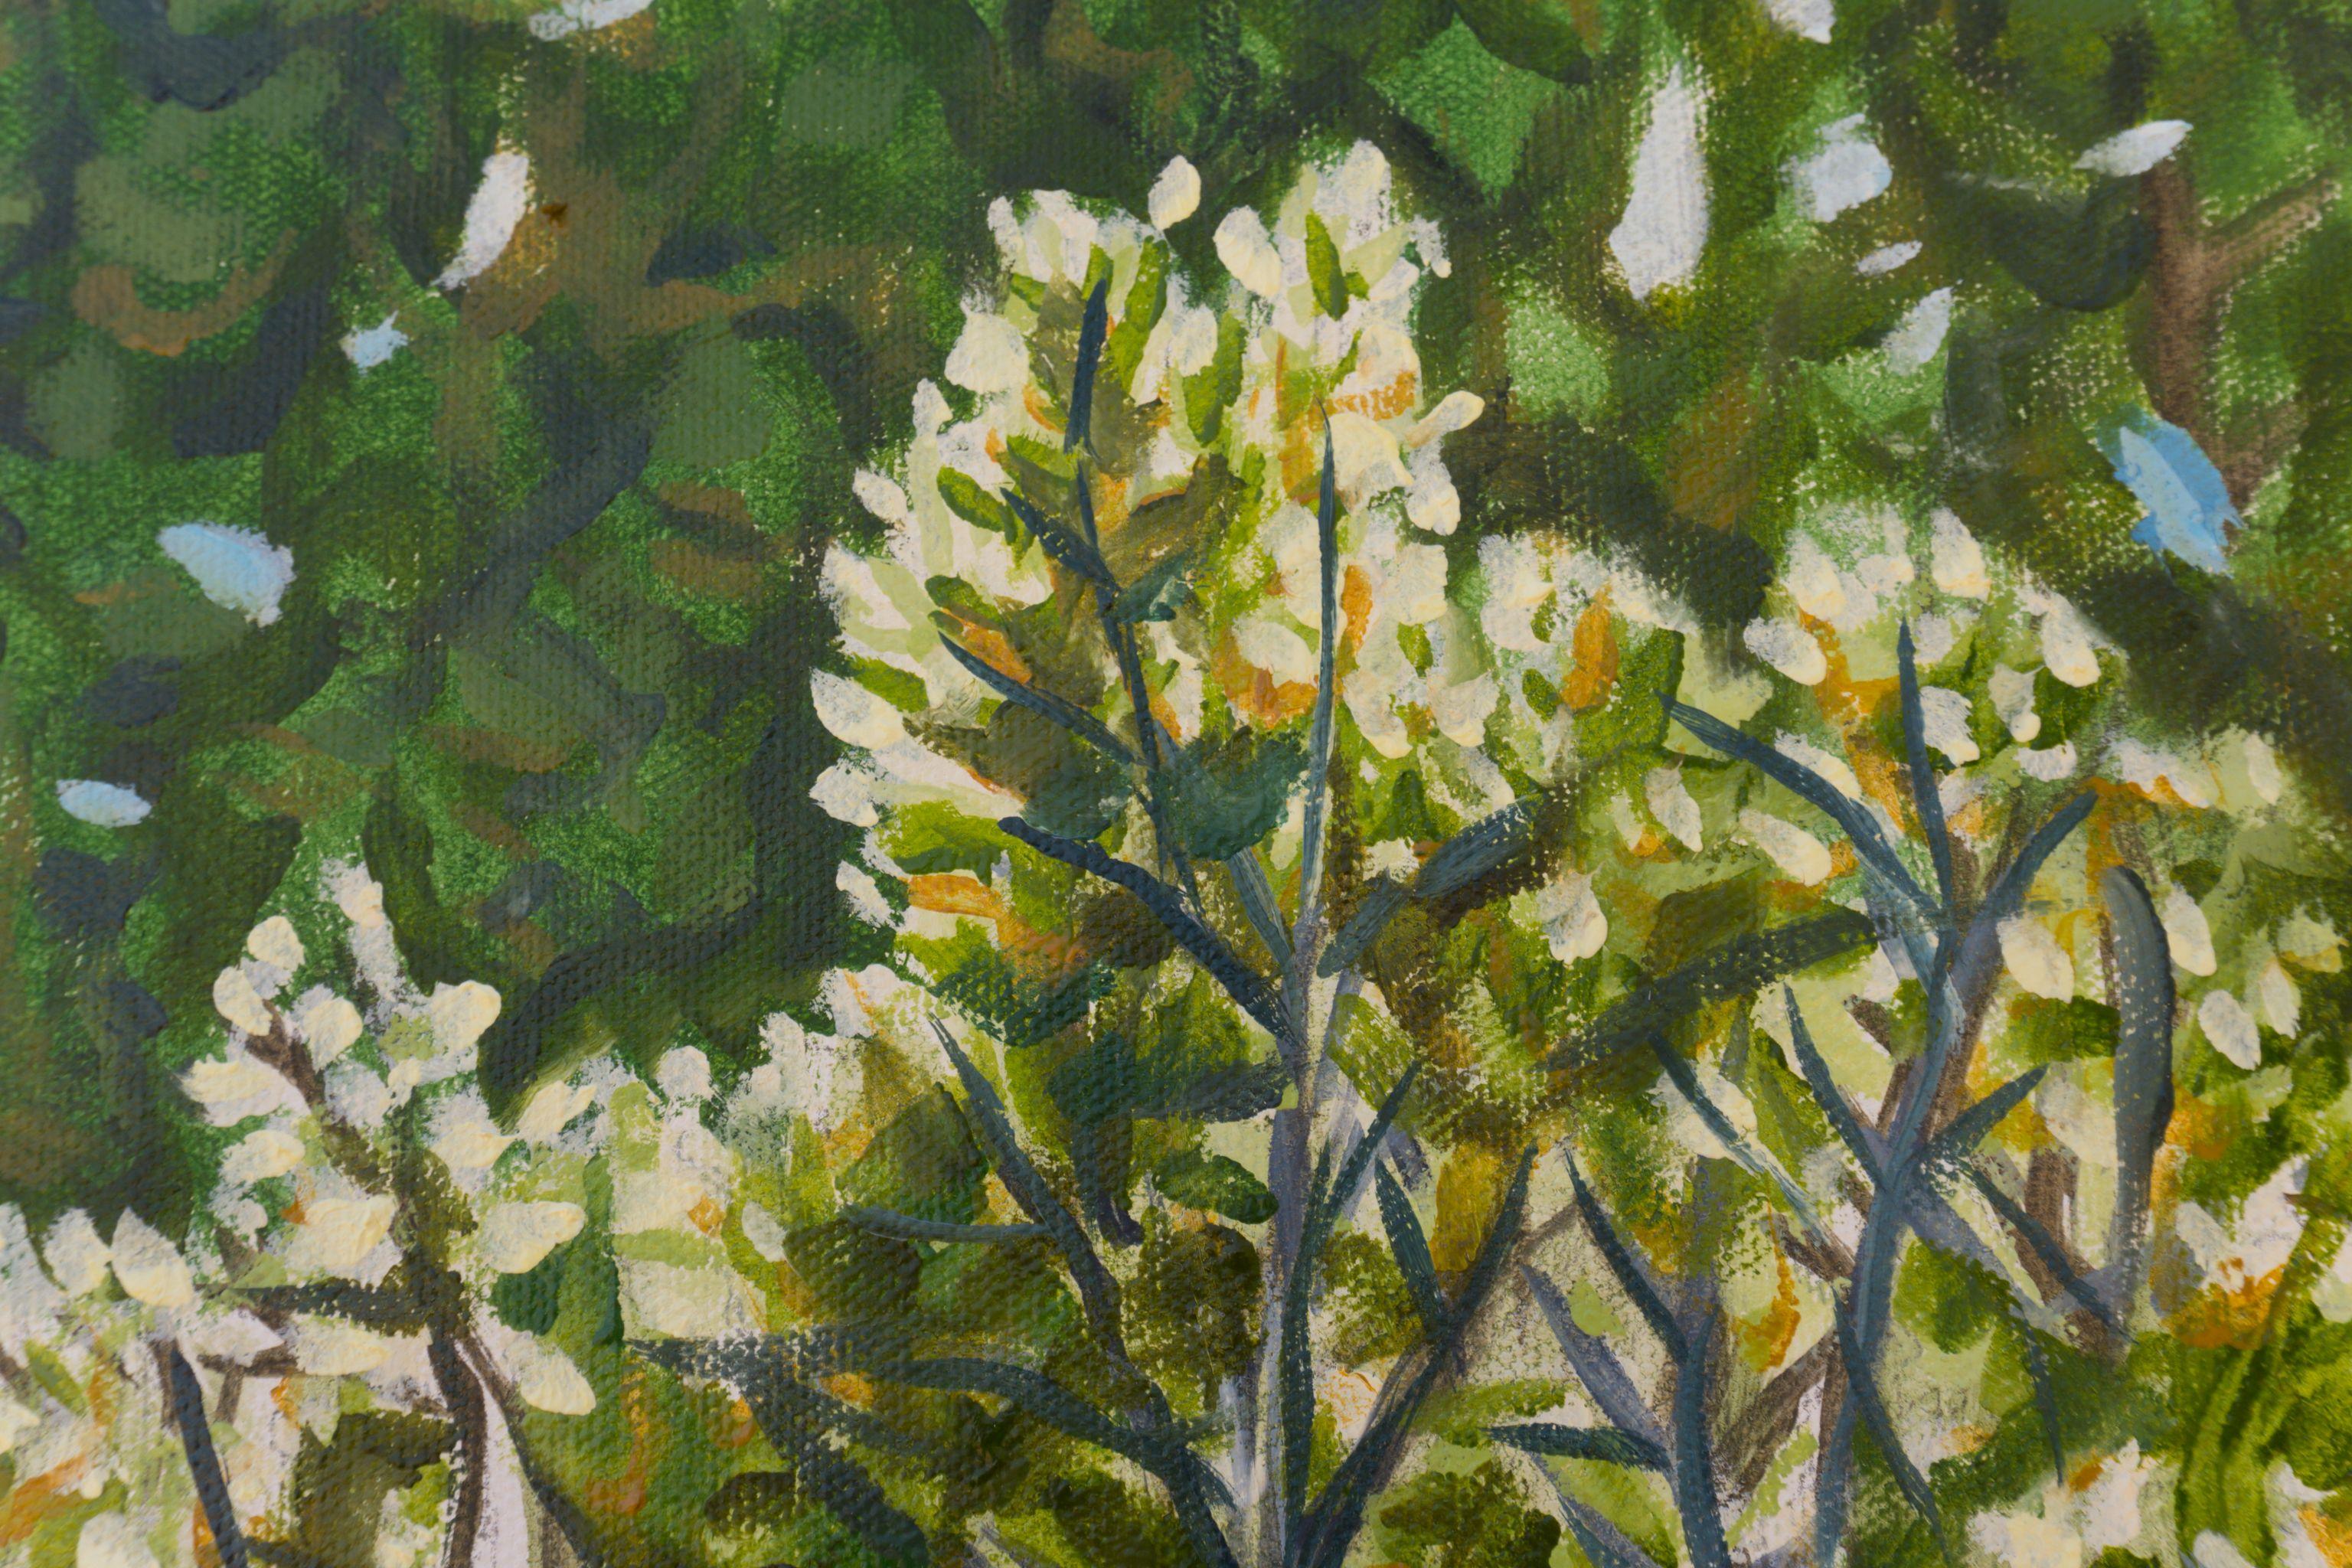 This piece was inspired by the long shadows & afternoon light filtering through the desert flora at wonderful camp spot in the Sheep Range outside Las Vegas. :: Painting :: Impressionist :: This piece comes with an official certificate of